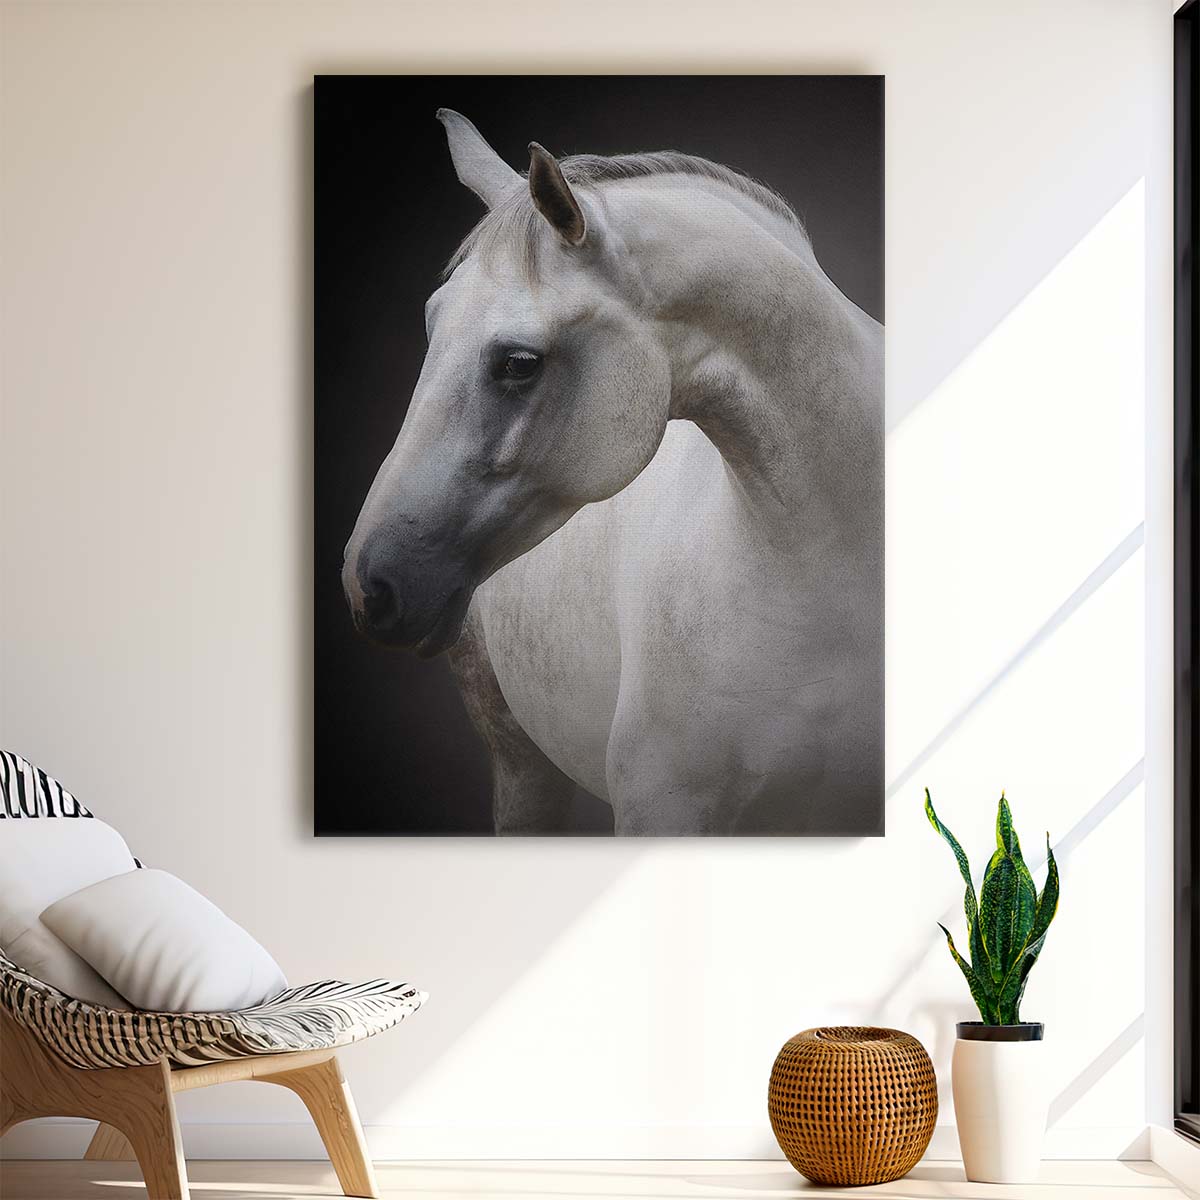 Minimalist White Horse Photography Art - Graceful Equestrian Animal Portrait by Luxuriance Designs, made in USA